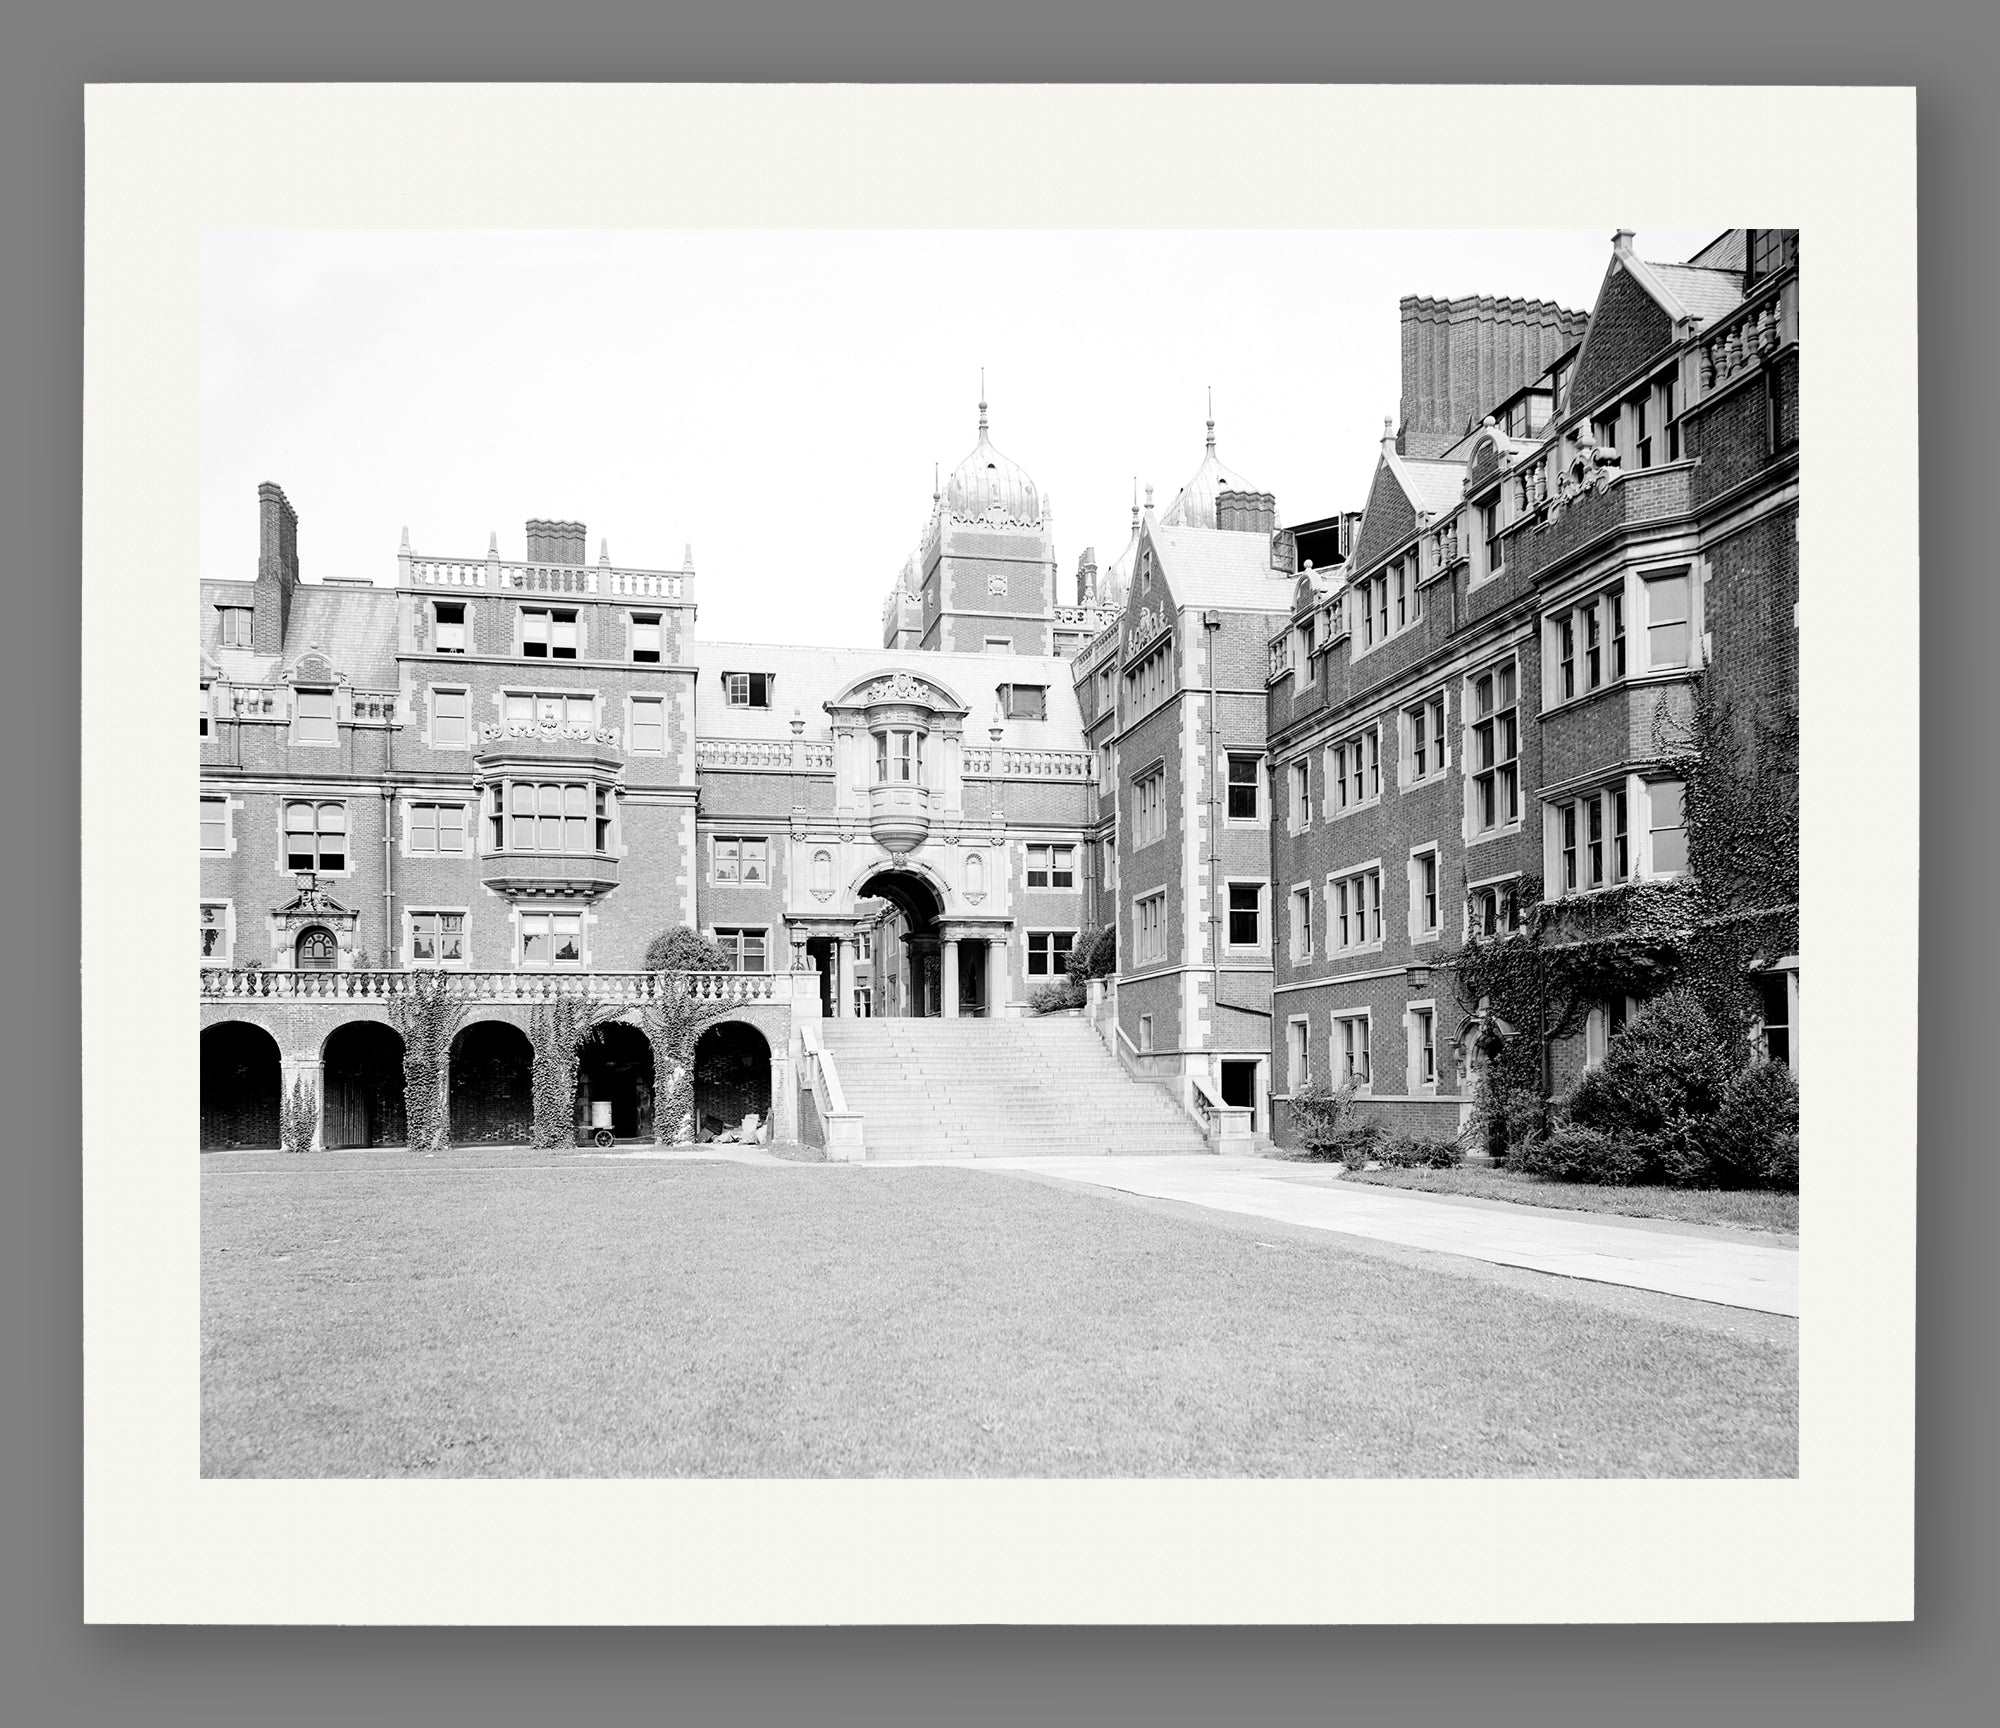 A mockup of a paper print of vintage photography featuring the University of Pennsylvania